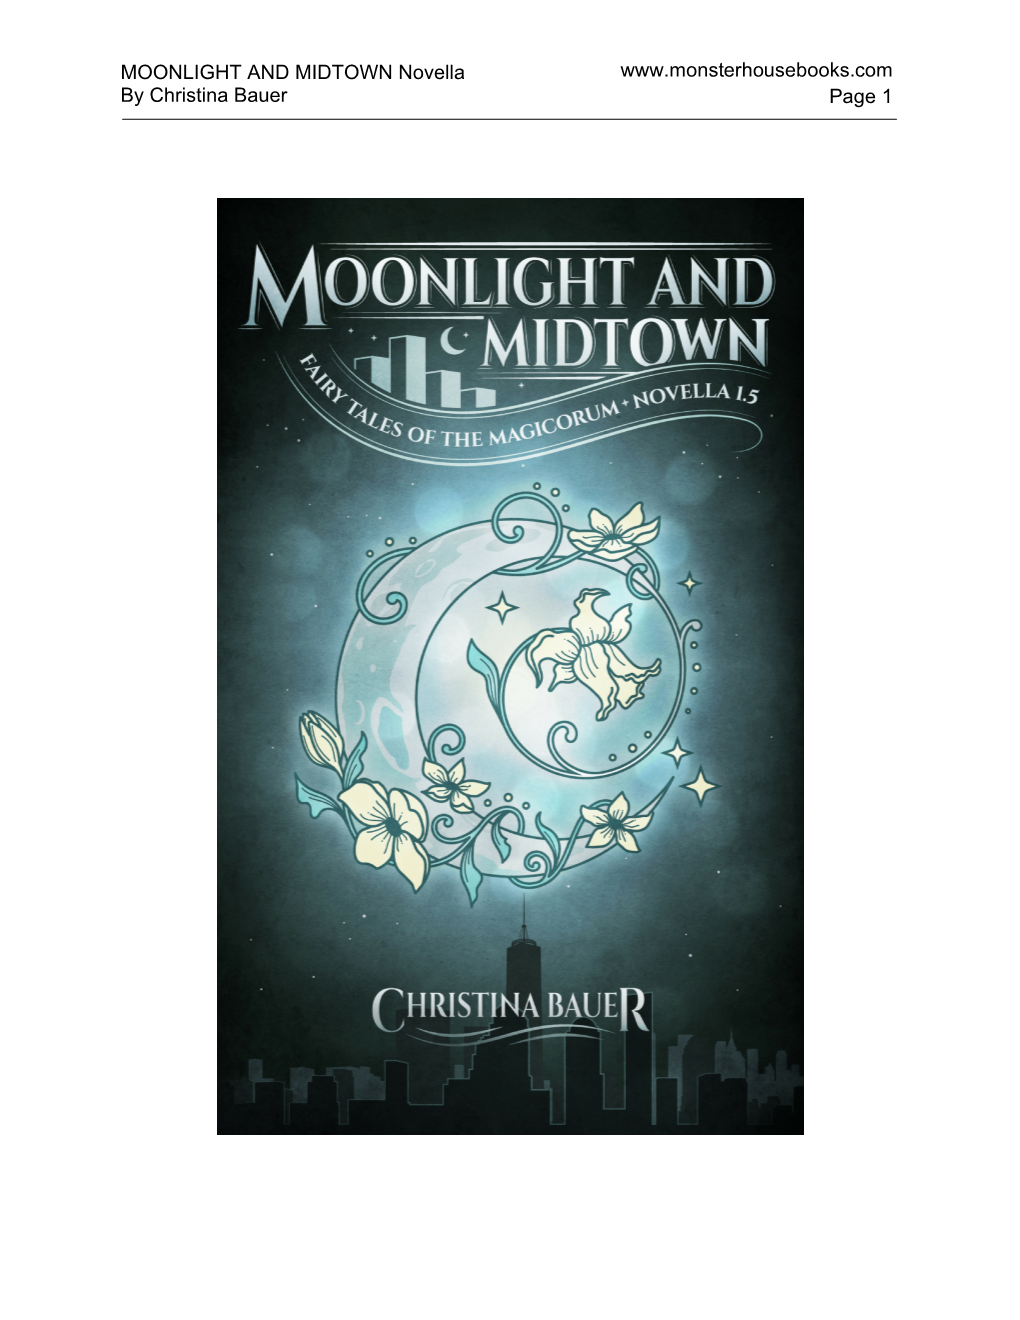 MOONLIGHT and MIDTOWN Novella by Christina Bauer Www